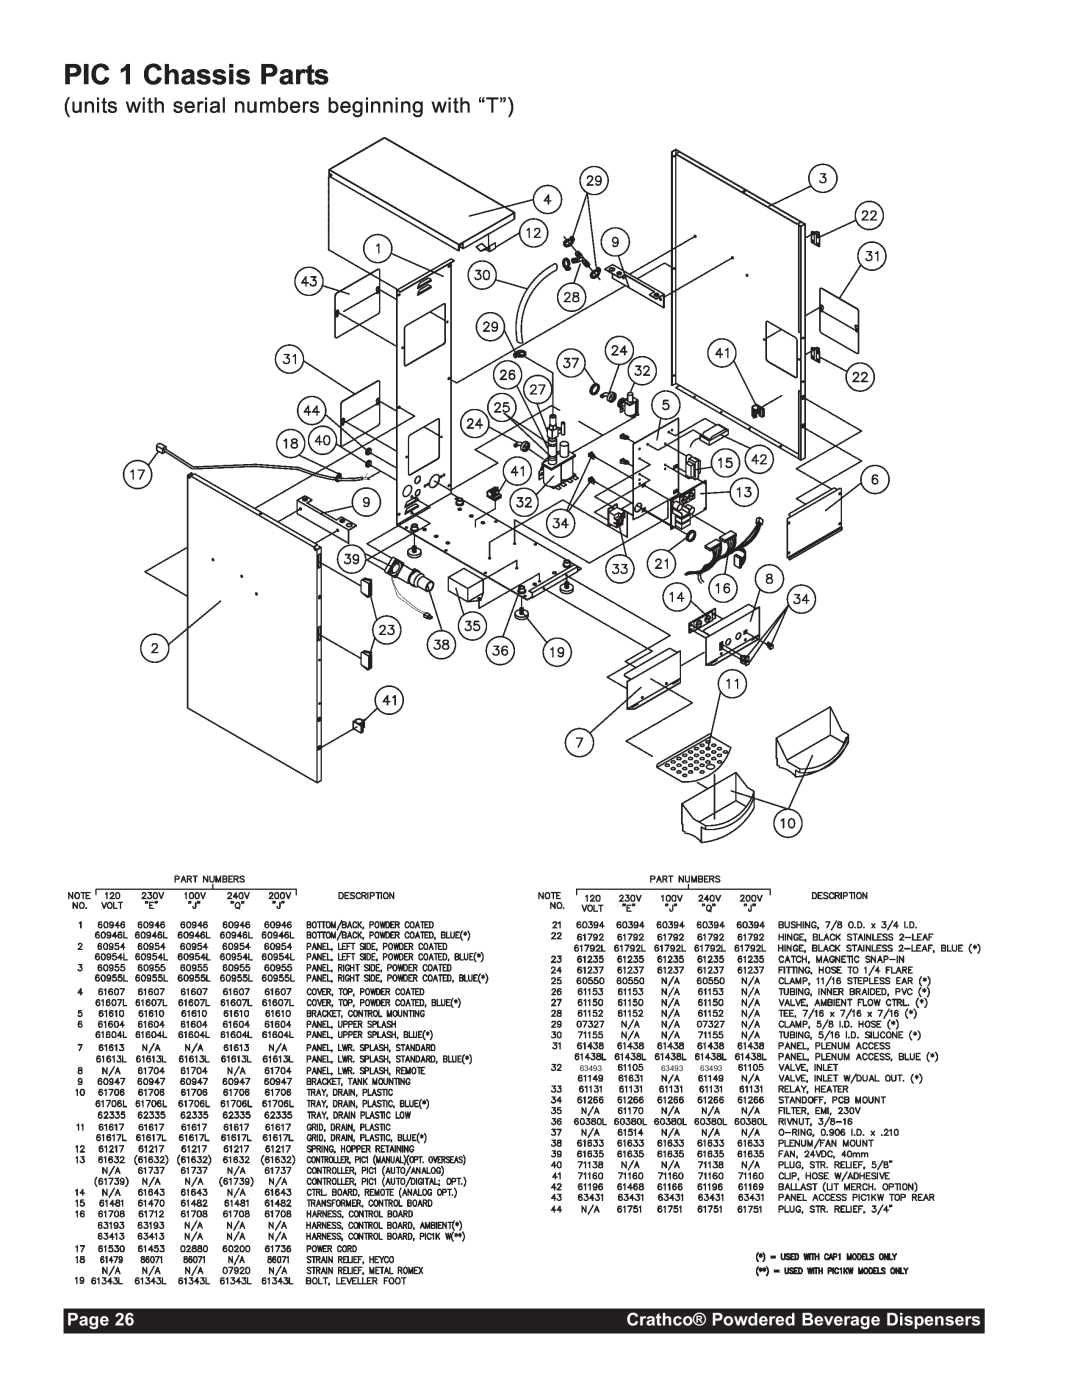 Grindmaster CC-302-20 service manual units with serial numbers beginning with “T”, PIC 1 Chassis Parts, Page, 63493 